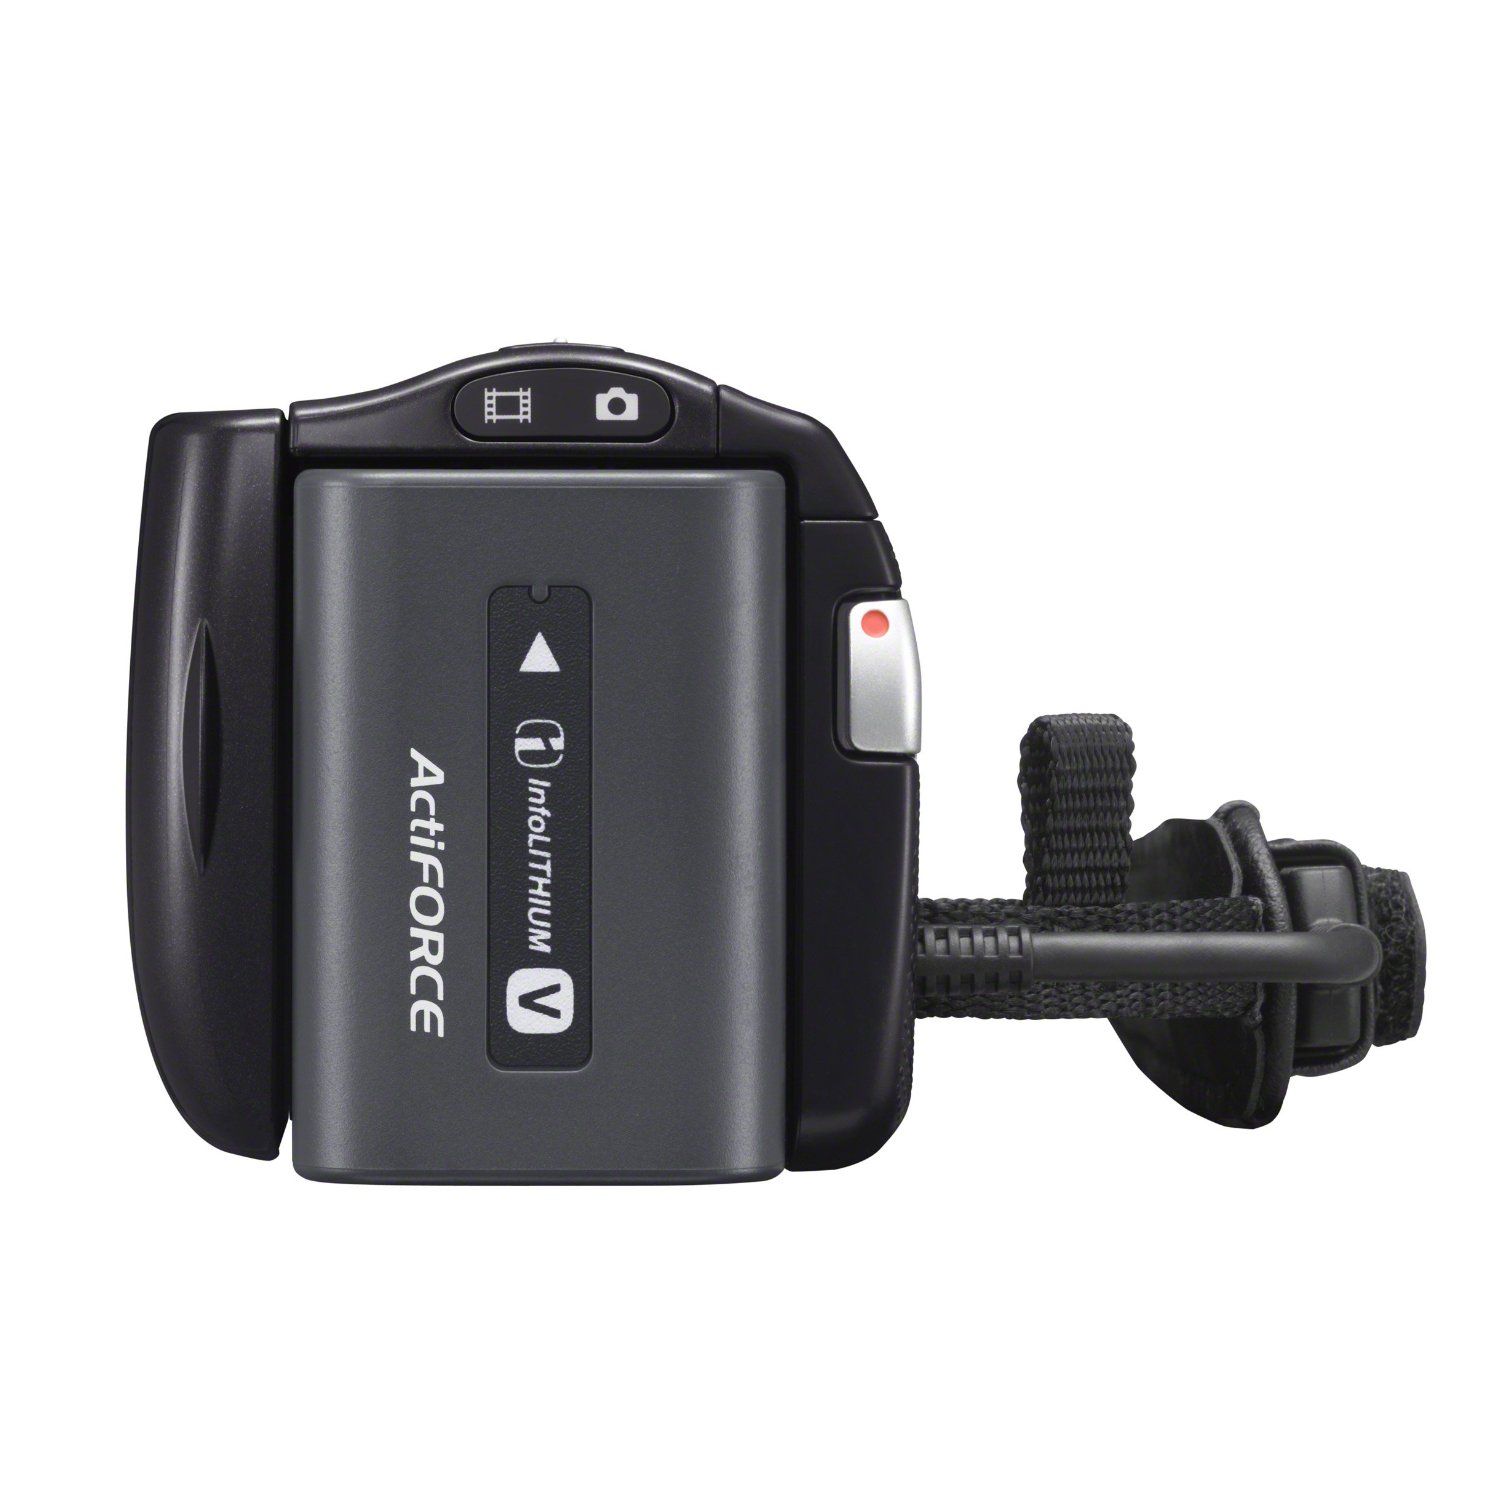 http://thetechjournal.com/wp-content/uploads/images/1205/1336441634-sonys-hdrcx260v-89-mp-camcorder-with-30x-optical-zoom-10.jpg